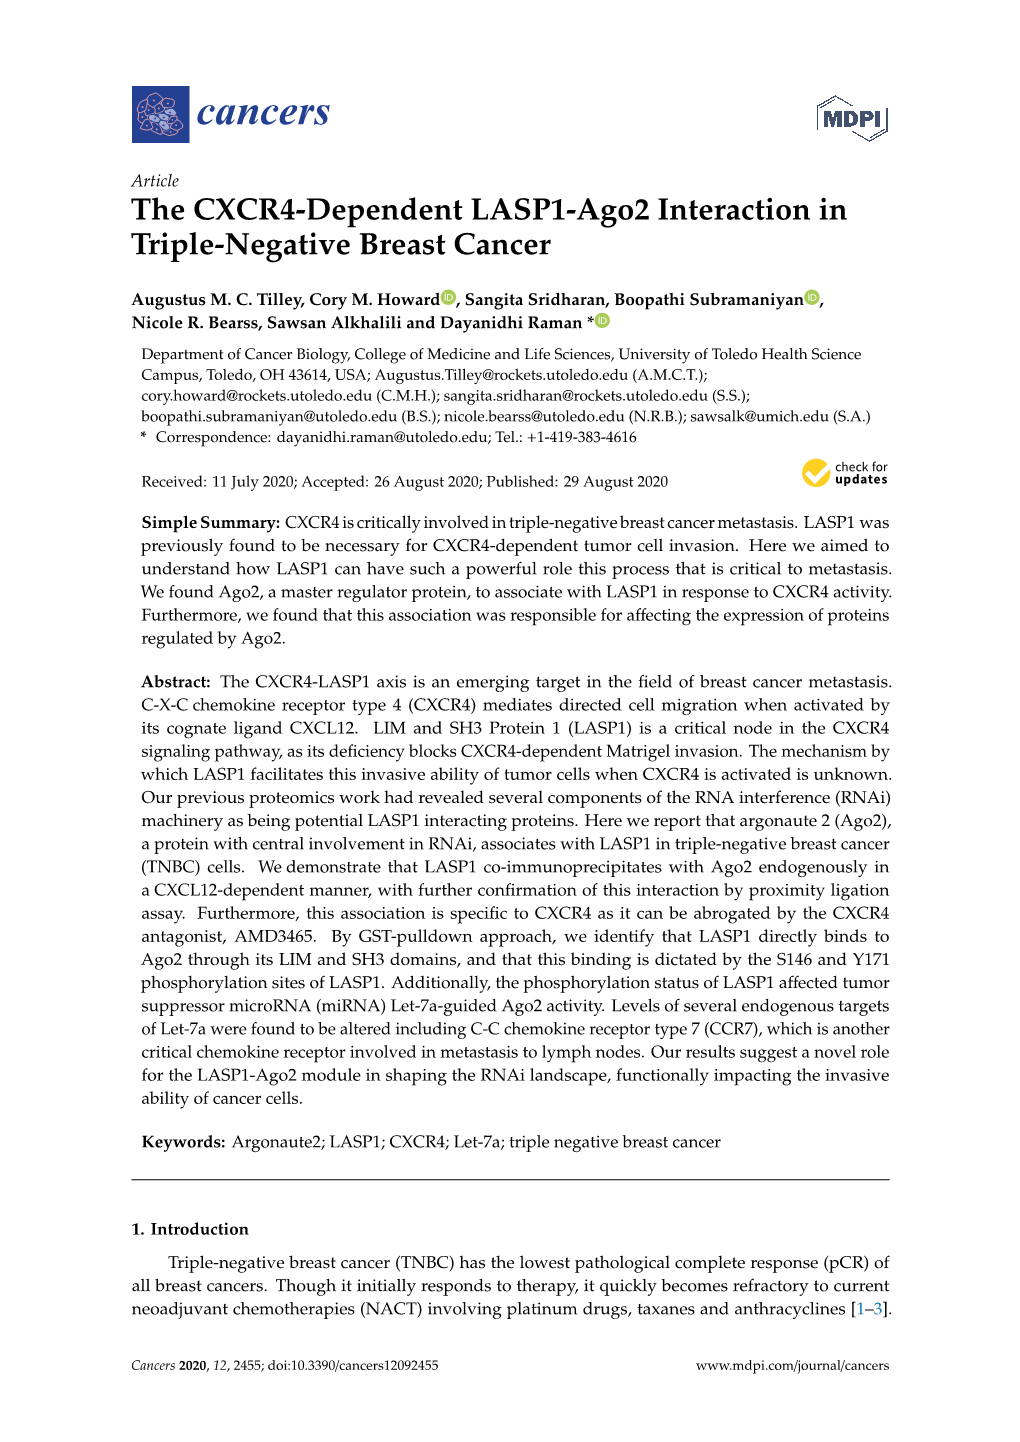 The CXCR4-Dependent LASP1-Ago2 Interaction in Triple-Negative Breast Cancer